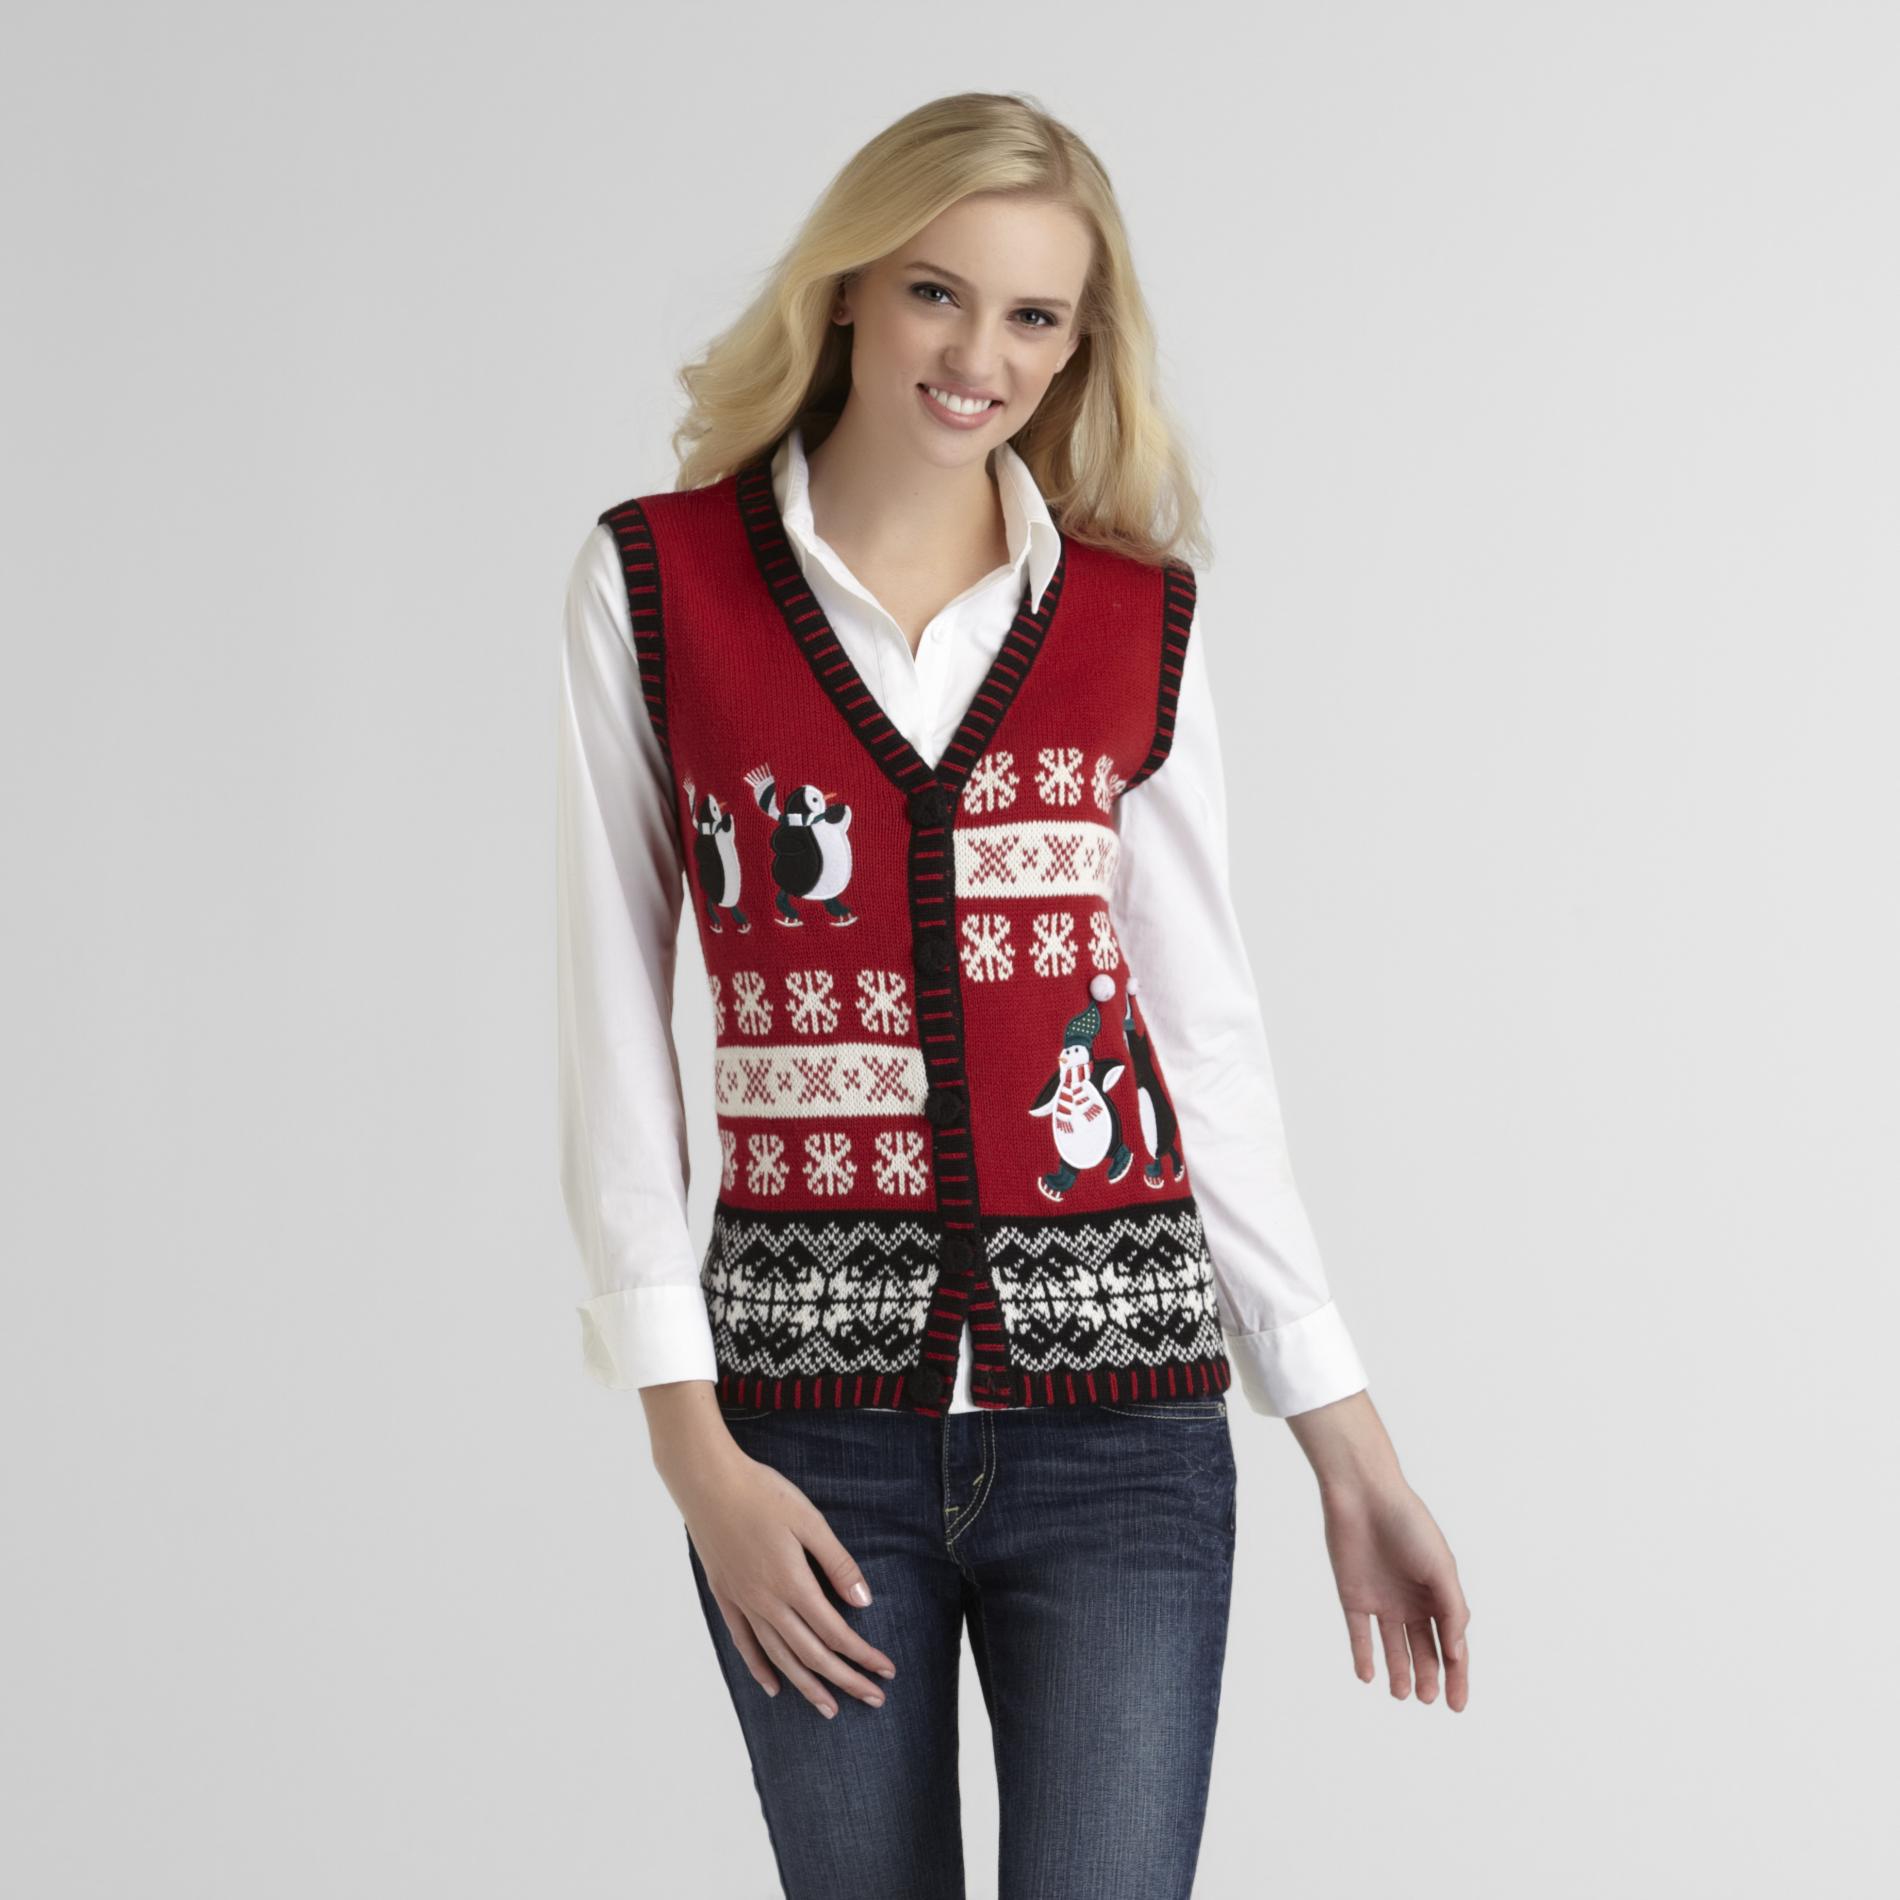 Holiday Editions Women's Christmas Sweater Vest - Embroidered